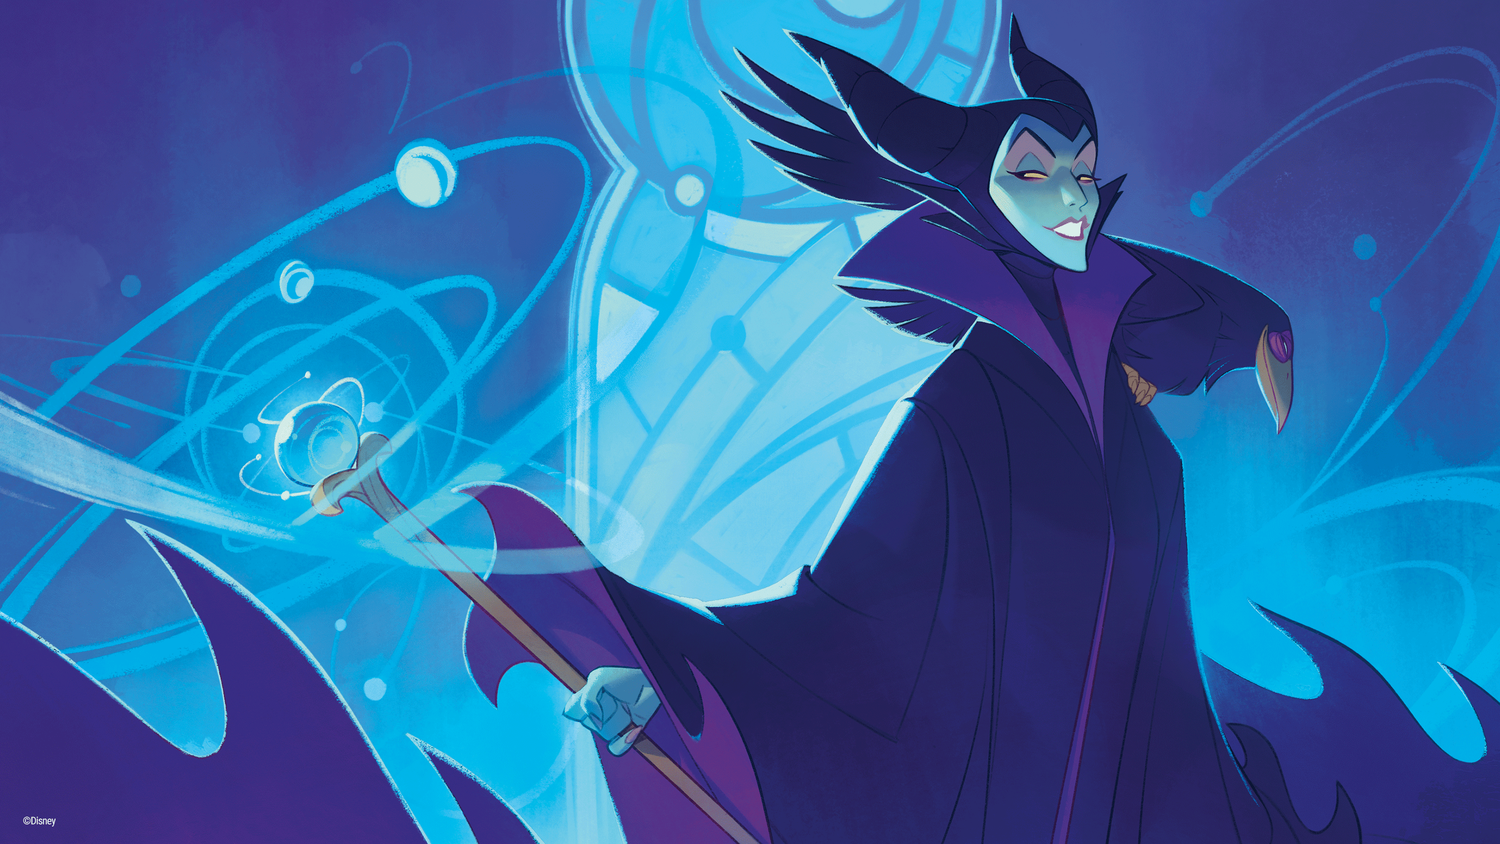 Disney Lorcana art (not card) for confirmed character Maleficent (human form)